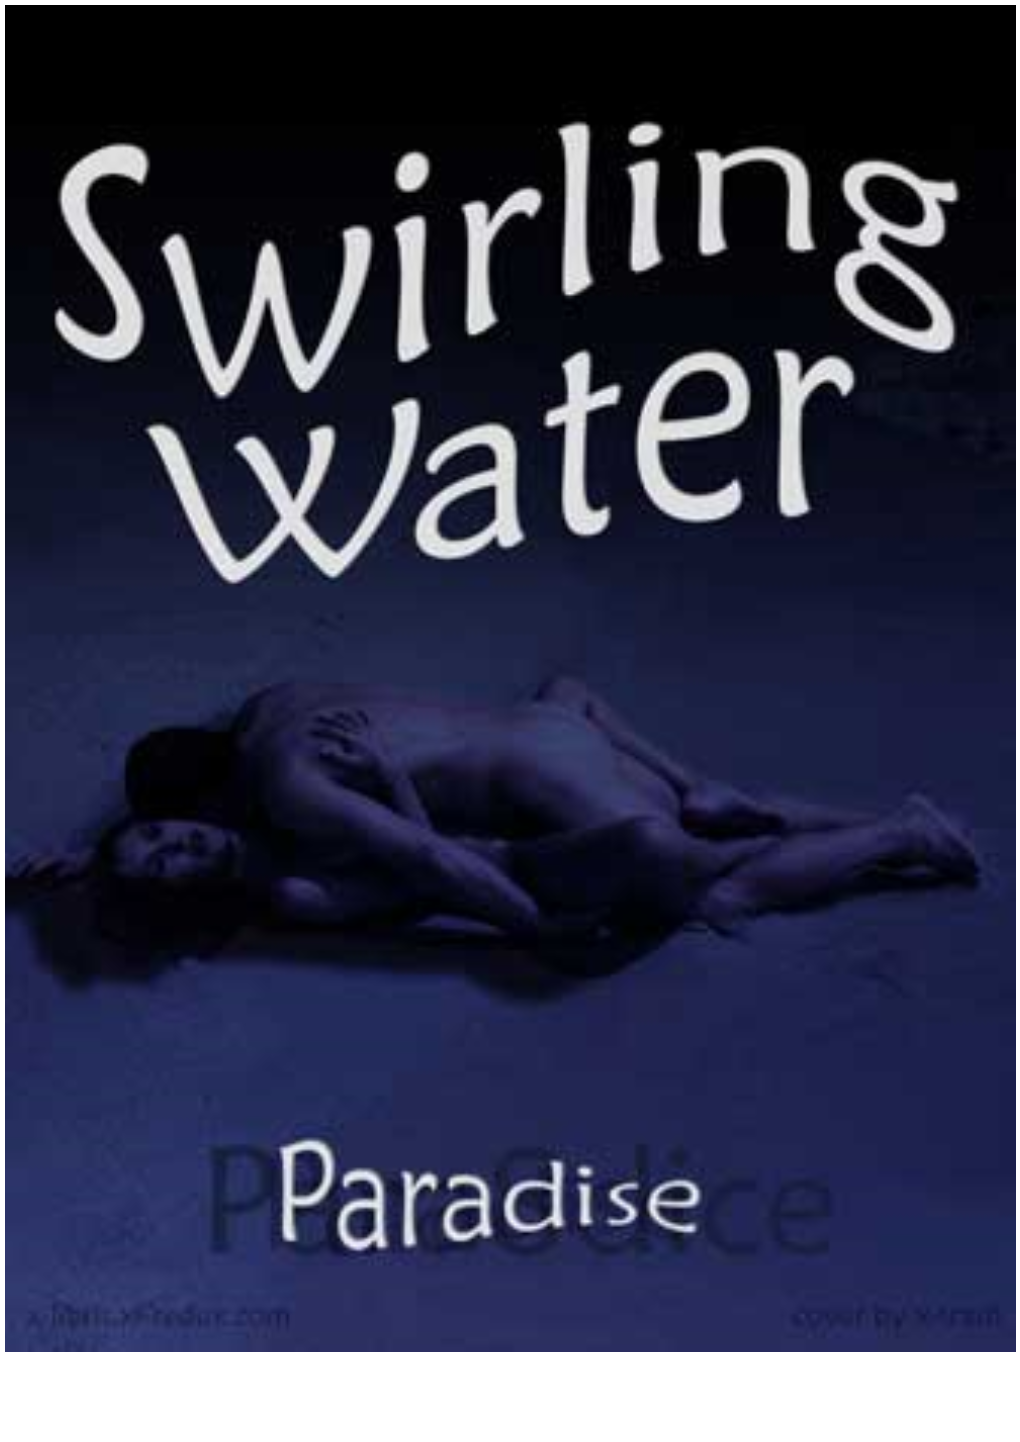 Swirling Water by Paradise Return to Main “Swirling Water” Page